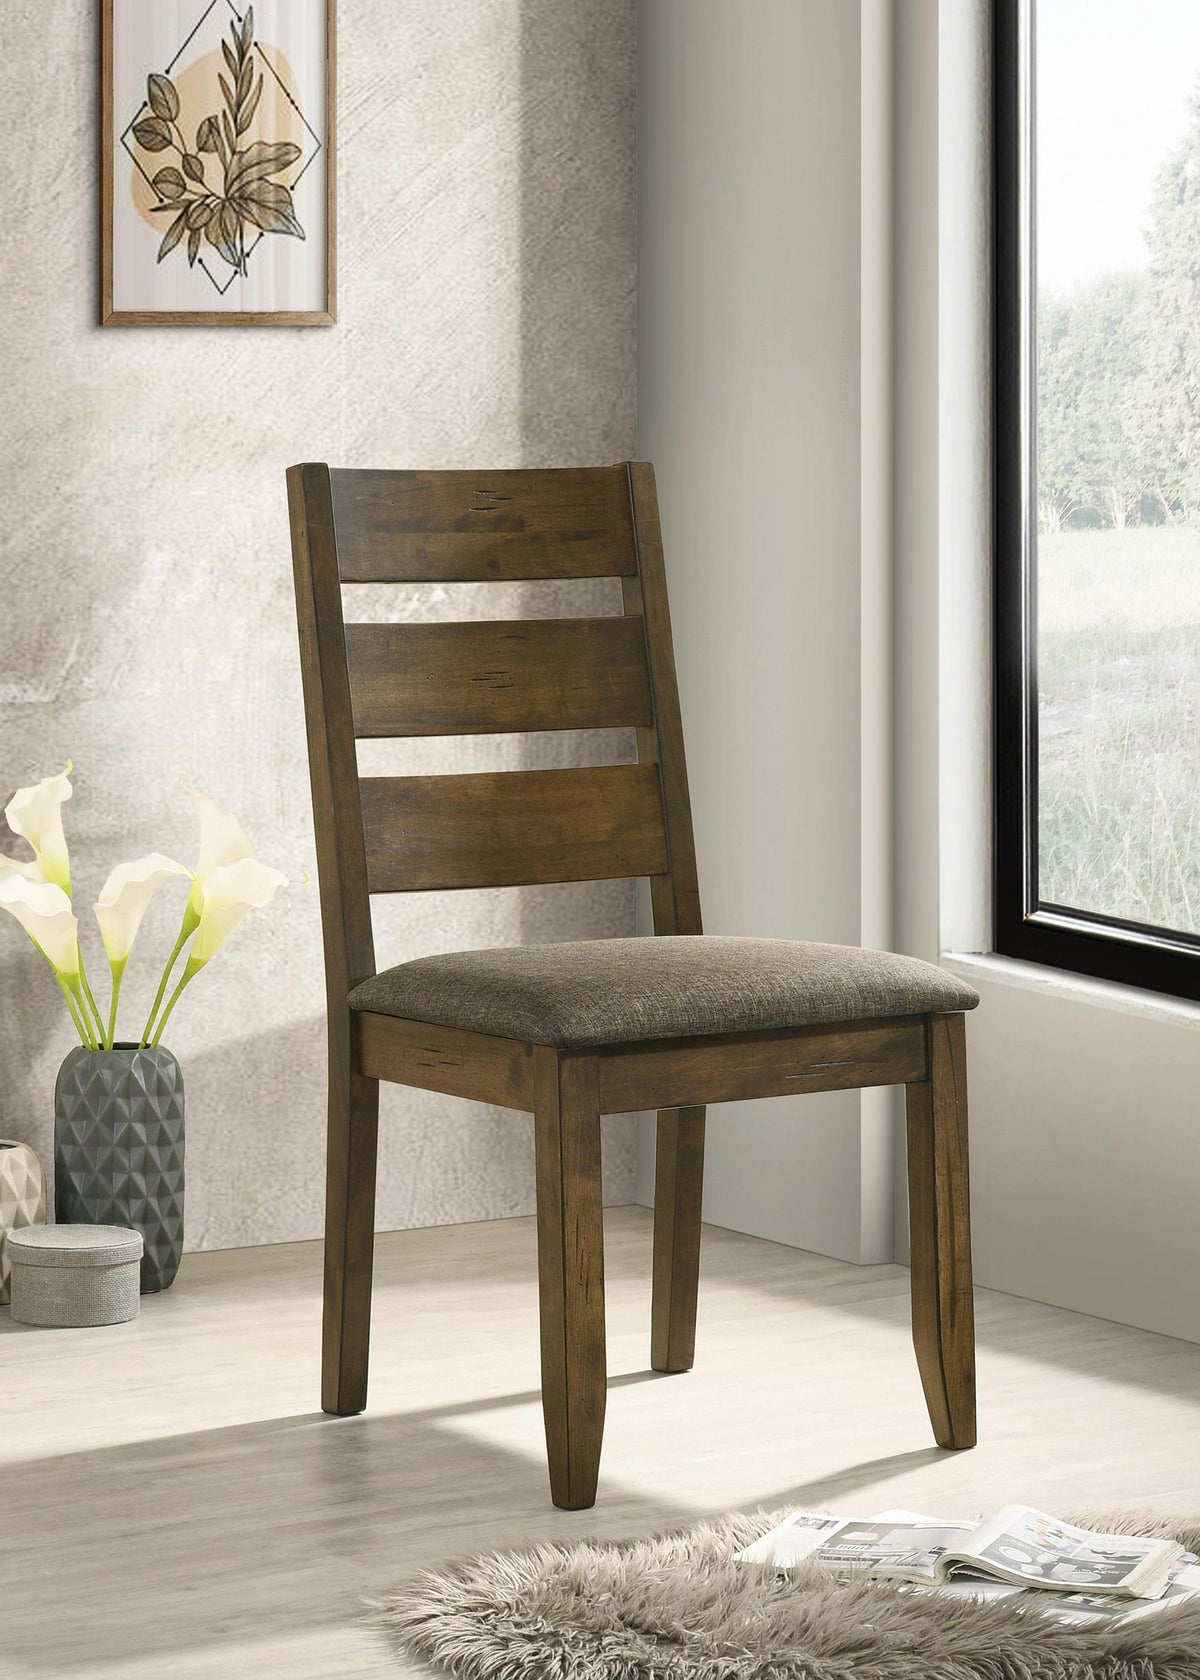 Alston Ladder Back Dining Side Chairs Knotty Nutmeg and Grey (Set of 2) Alston Ladder Back Dining Side Chairs Knotty Nutmeg and Grey (Set of 2) Half Price Furniture